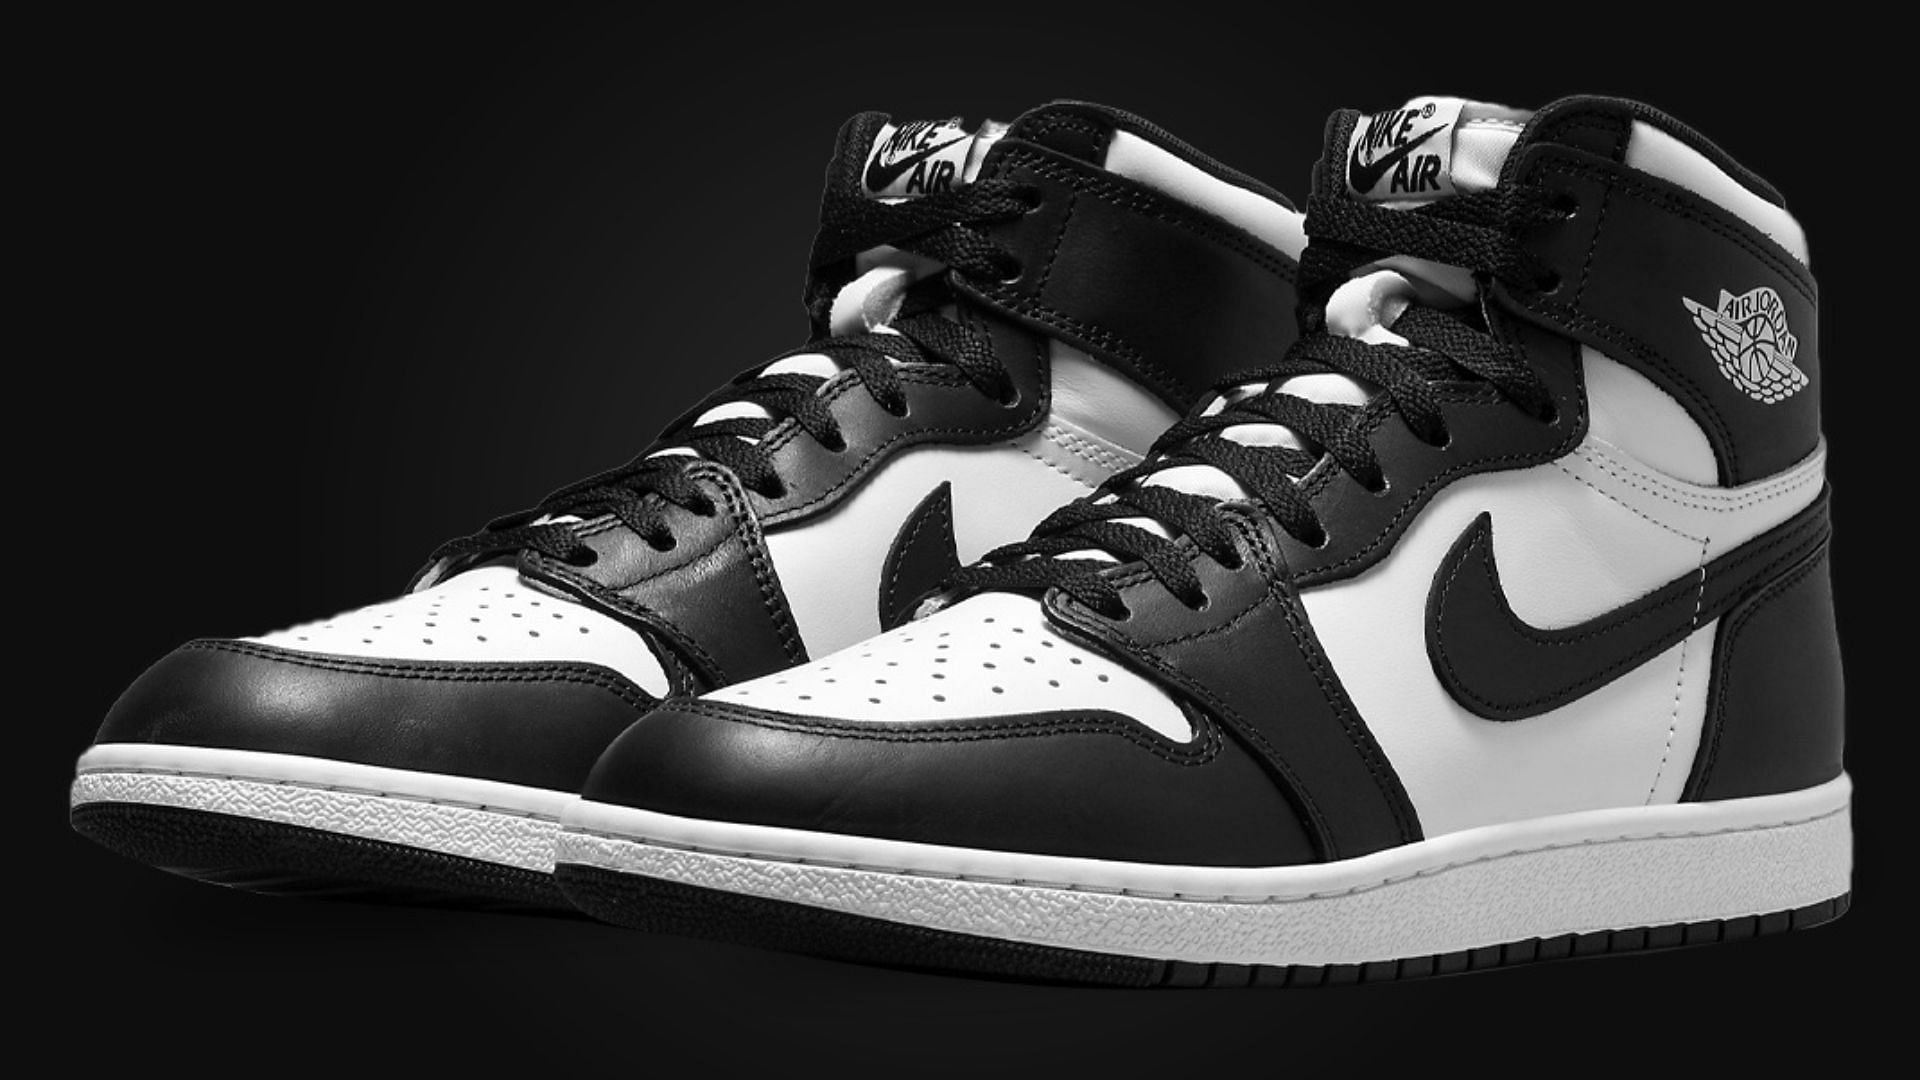 abolish Luscious Heading Where to buy Air Jordan 1 High 85 “Panda” shoes? Price and more details  explored